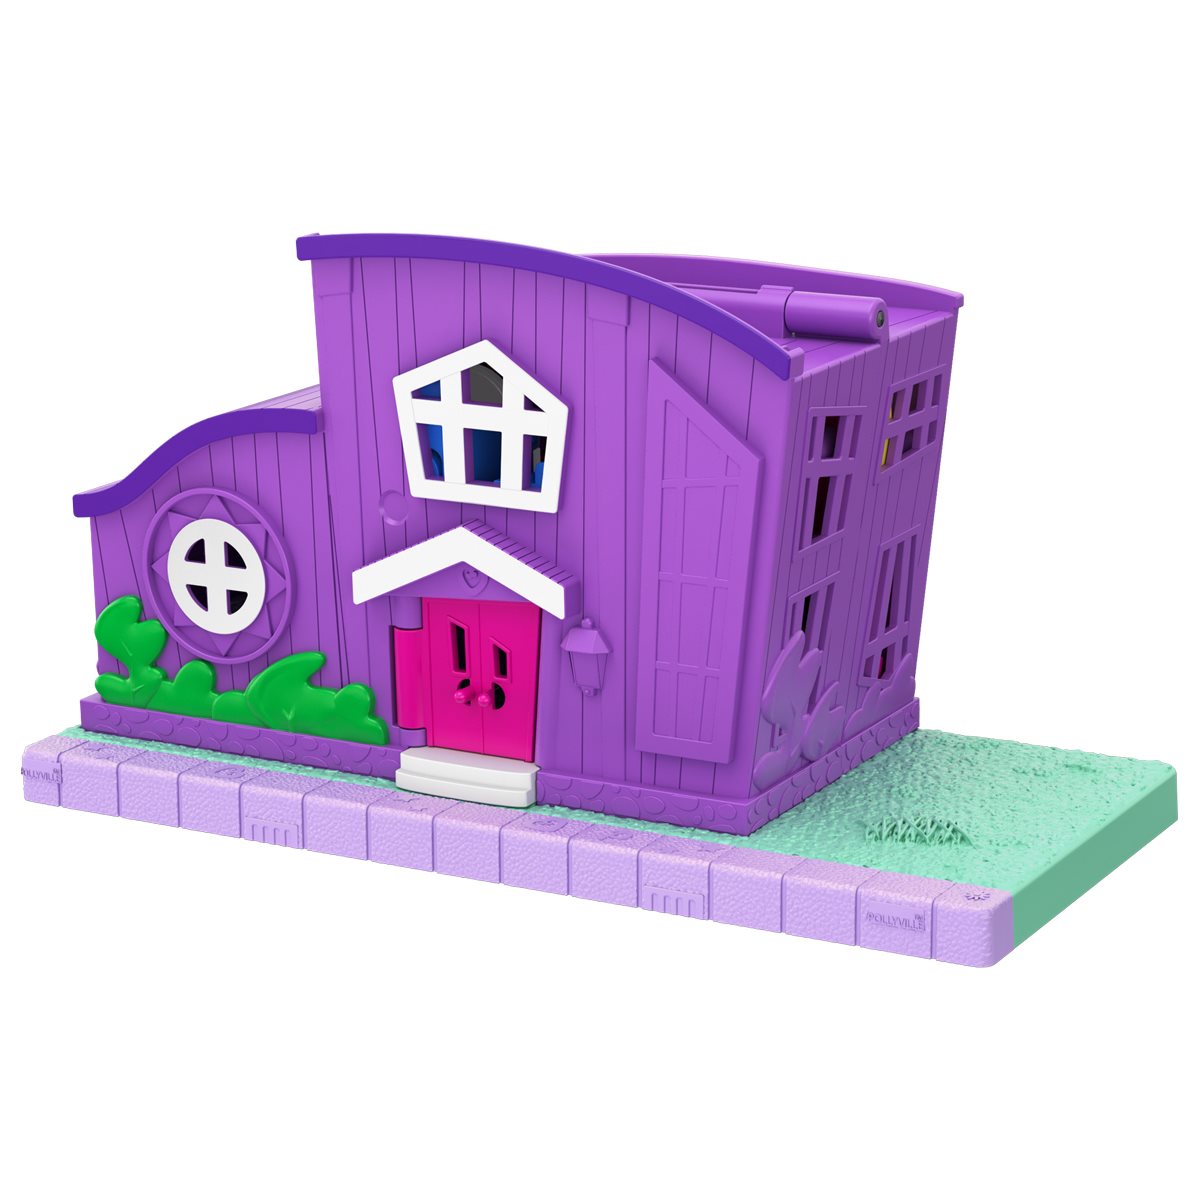 Polly Pocket Pocket House 10 Accessories & Micro Dolls 2 Stories 